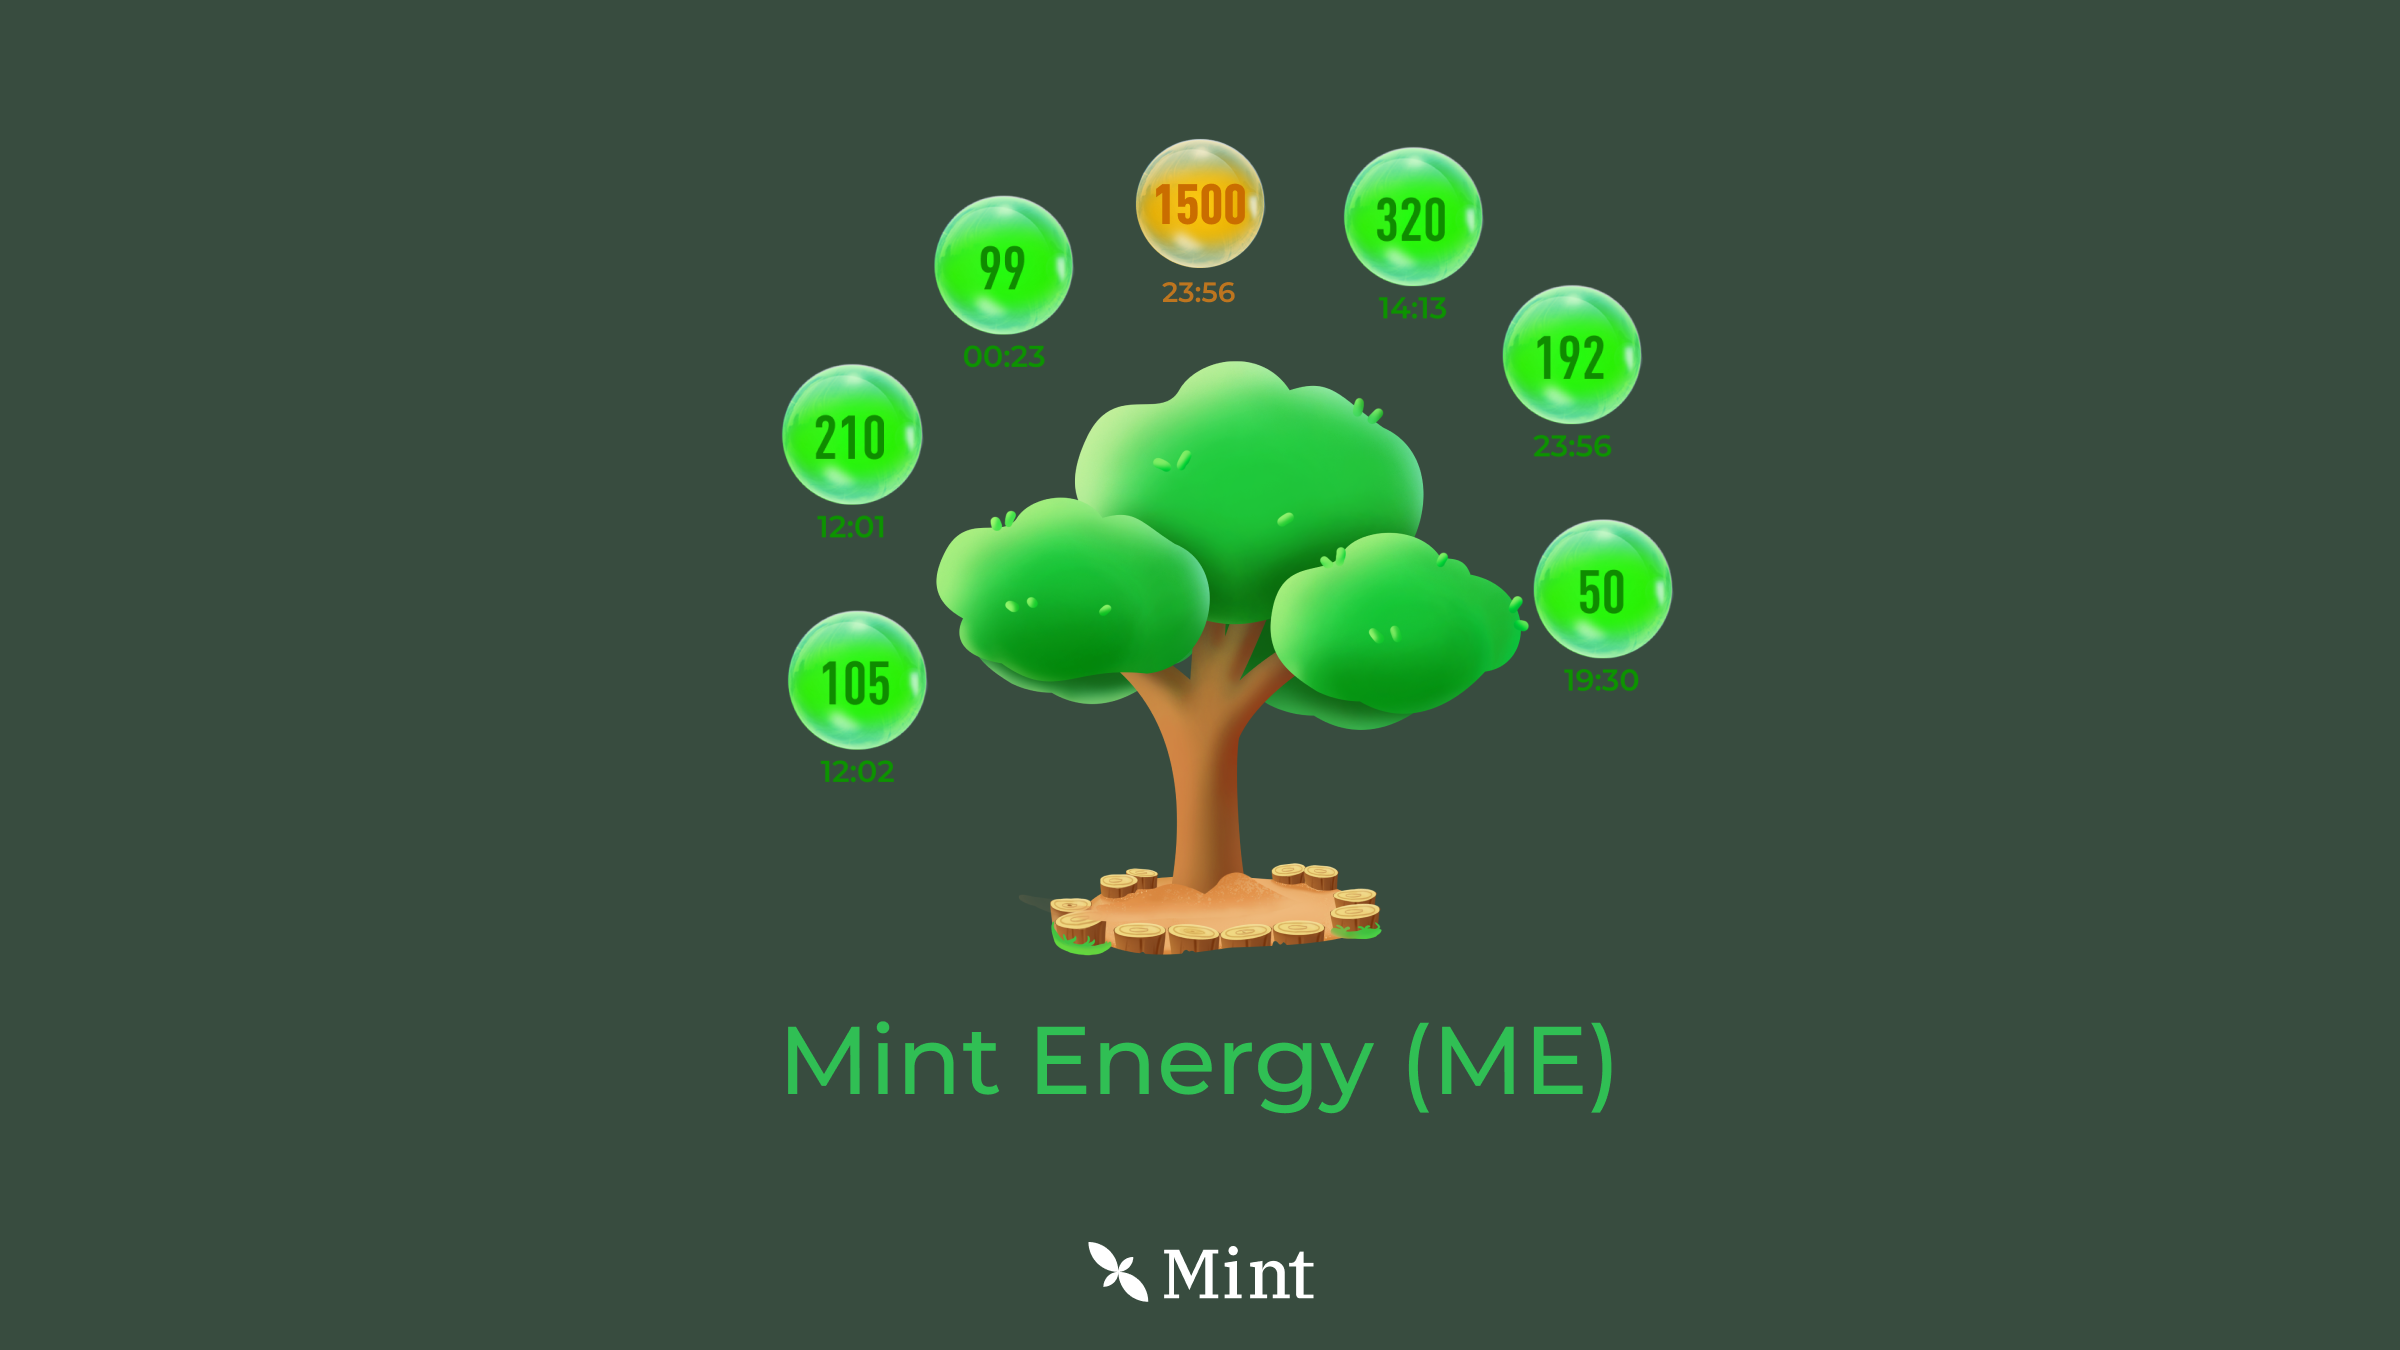 "Harness the Power of Mint Energy"